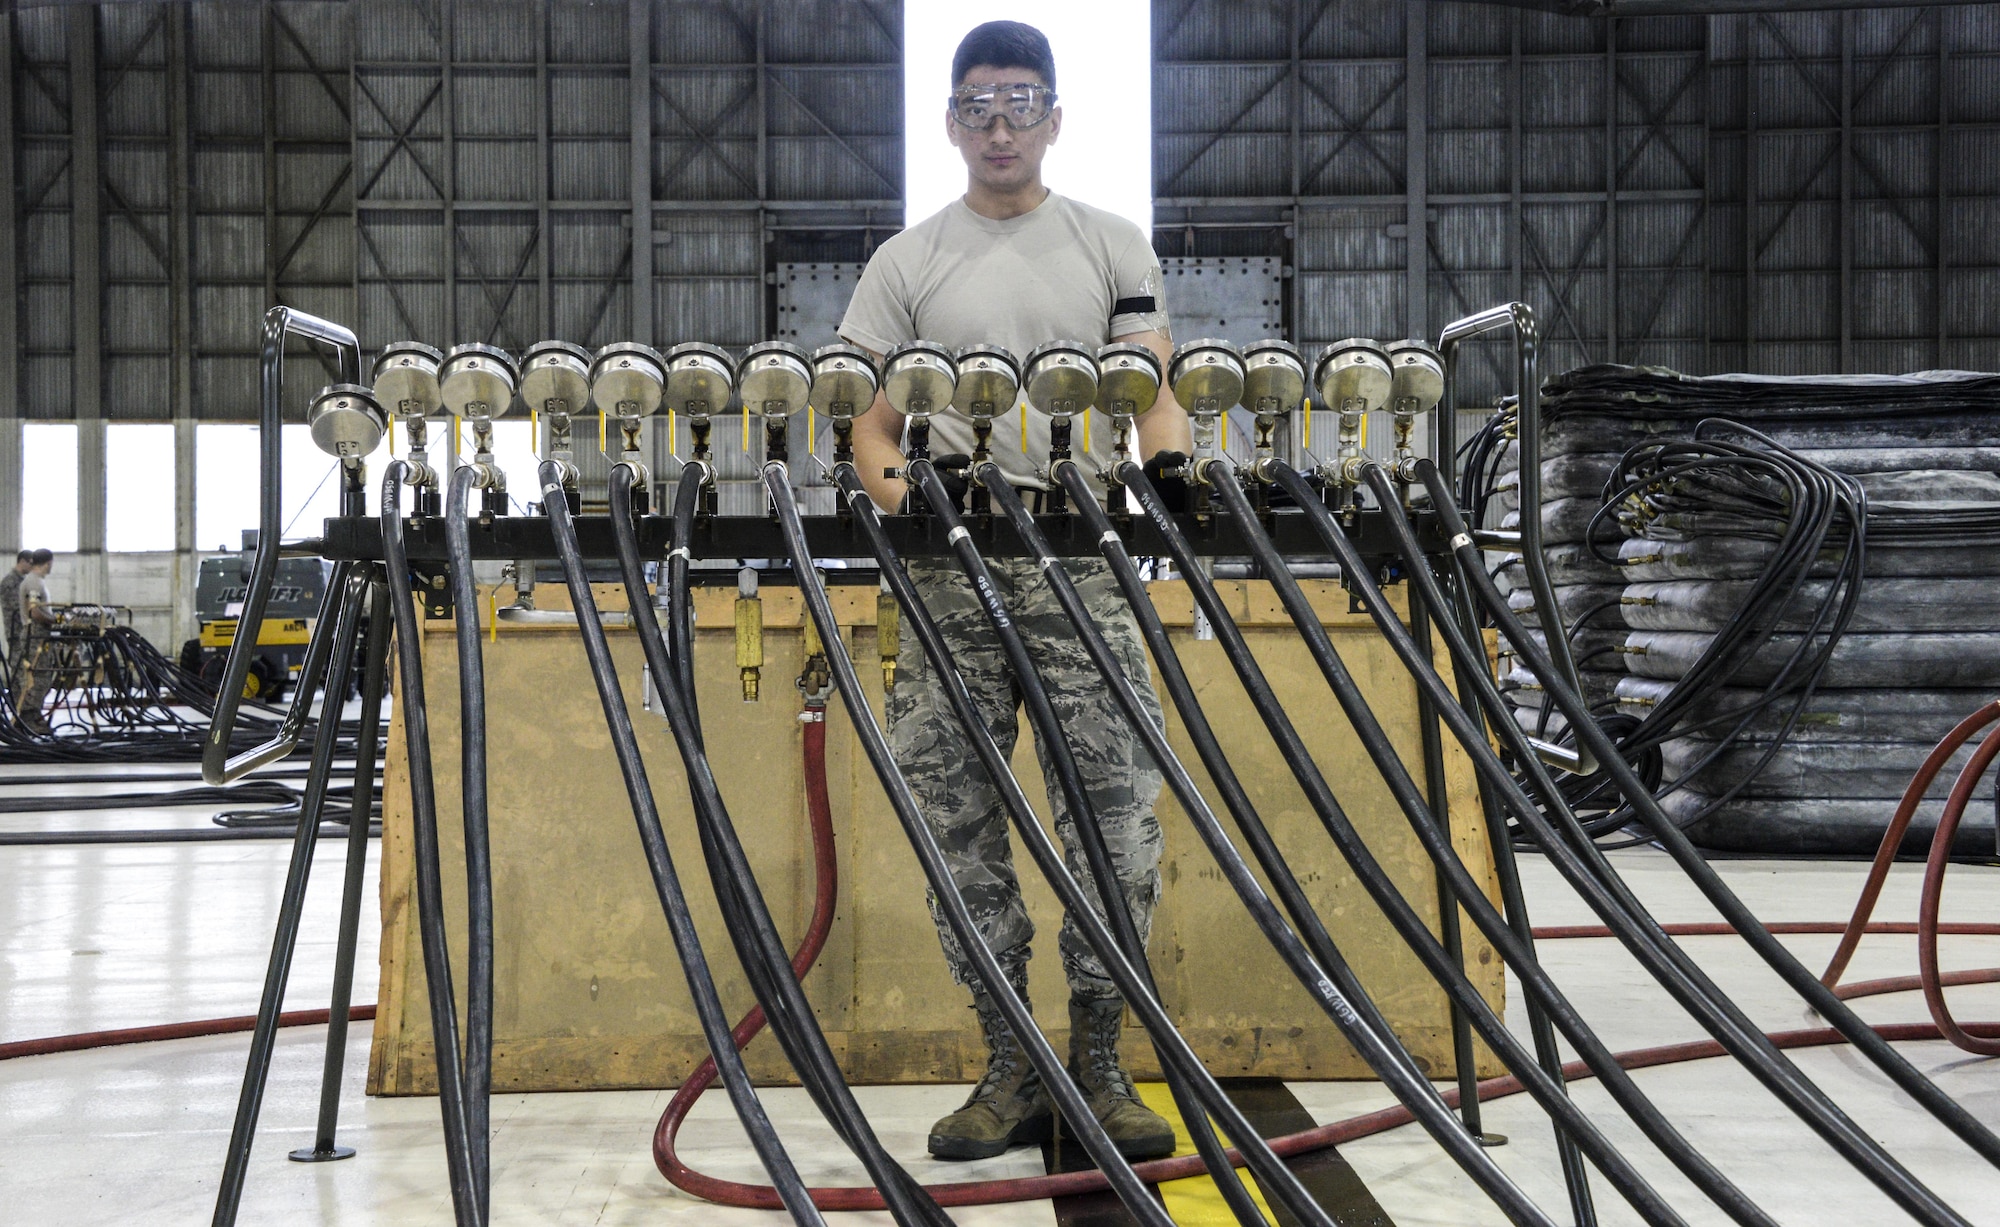 An Airman from the 60th Maintenance Squadron monitors the pounds per square inch while inflating lifting bags during an annual quality assurance inspection of the crash, damaged or disabled aircraft recovery program Feb. 9, 2017 at Travis Air Force Base, Calif. The lifting bags, filled to 7 PSI during the inspection, are used to lift a downed aircraft so it can be salvaged, repaired and recovered.  (U.S. Air Force photo by Senior Airman Amber Carter)